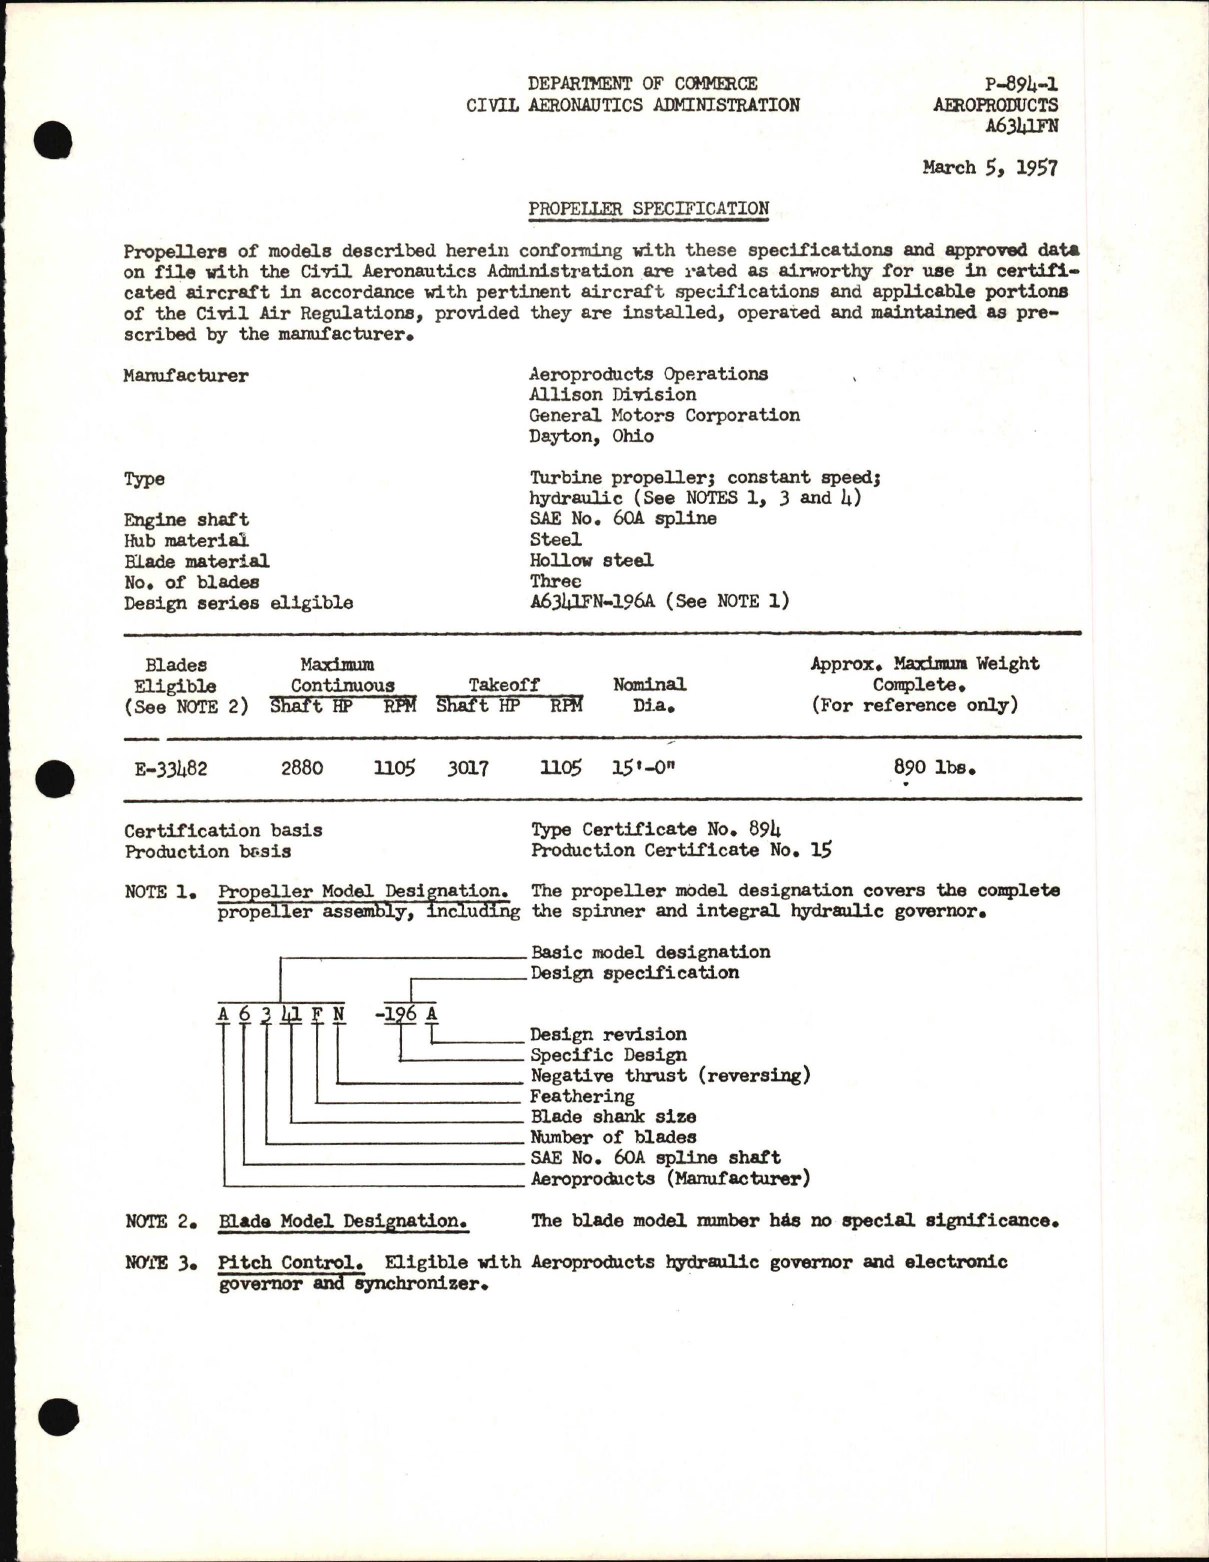 Sample page 1 from AirCorps Library document: A6341FN